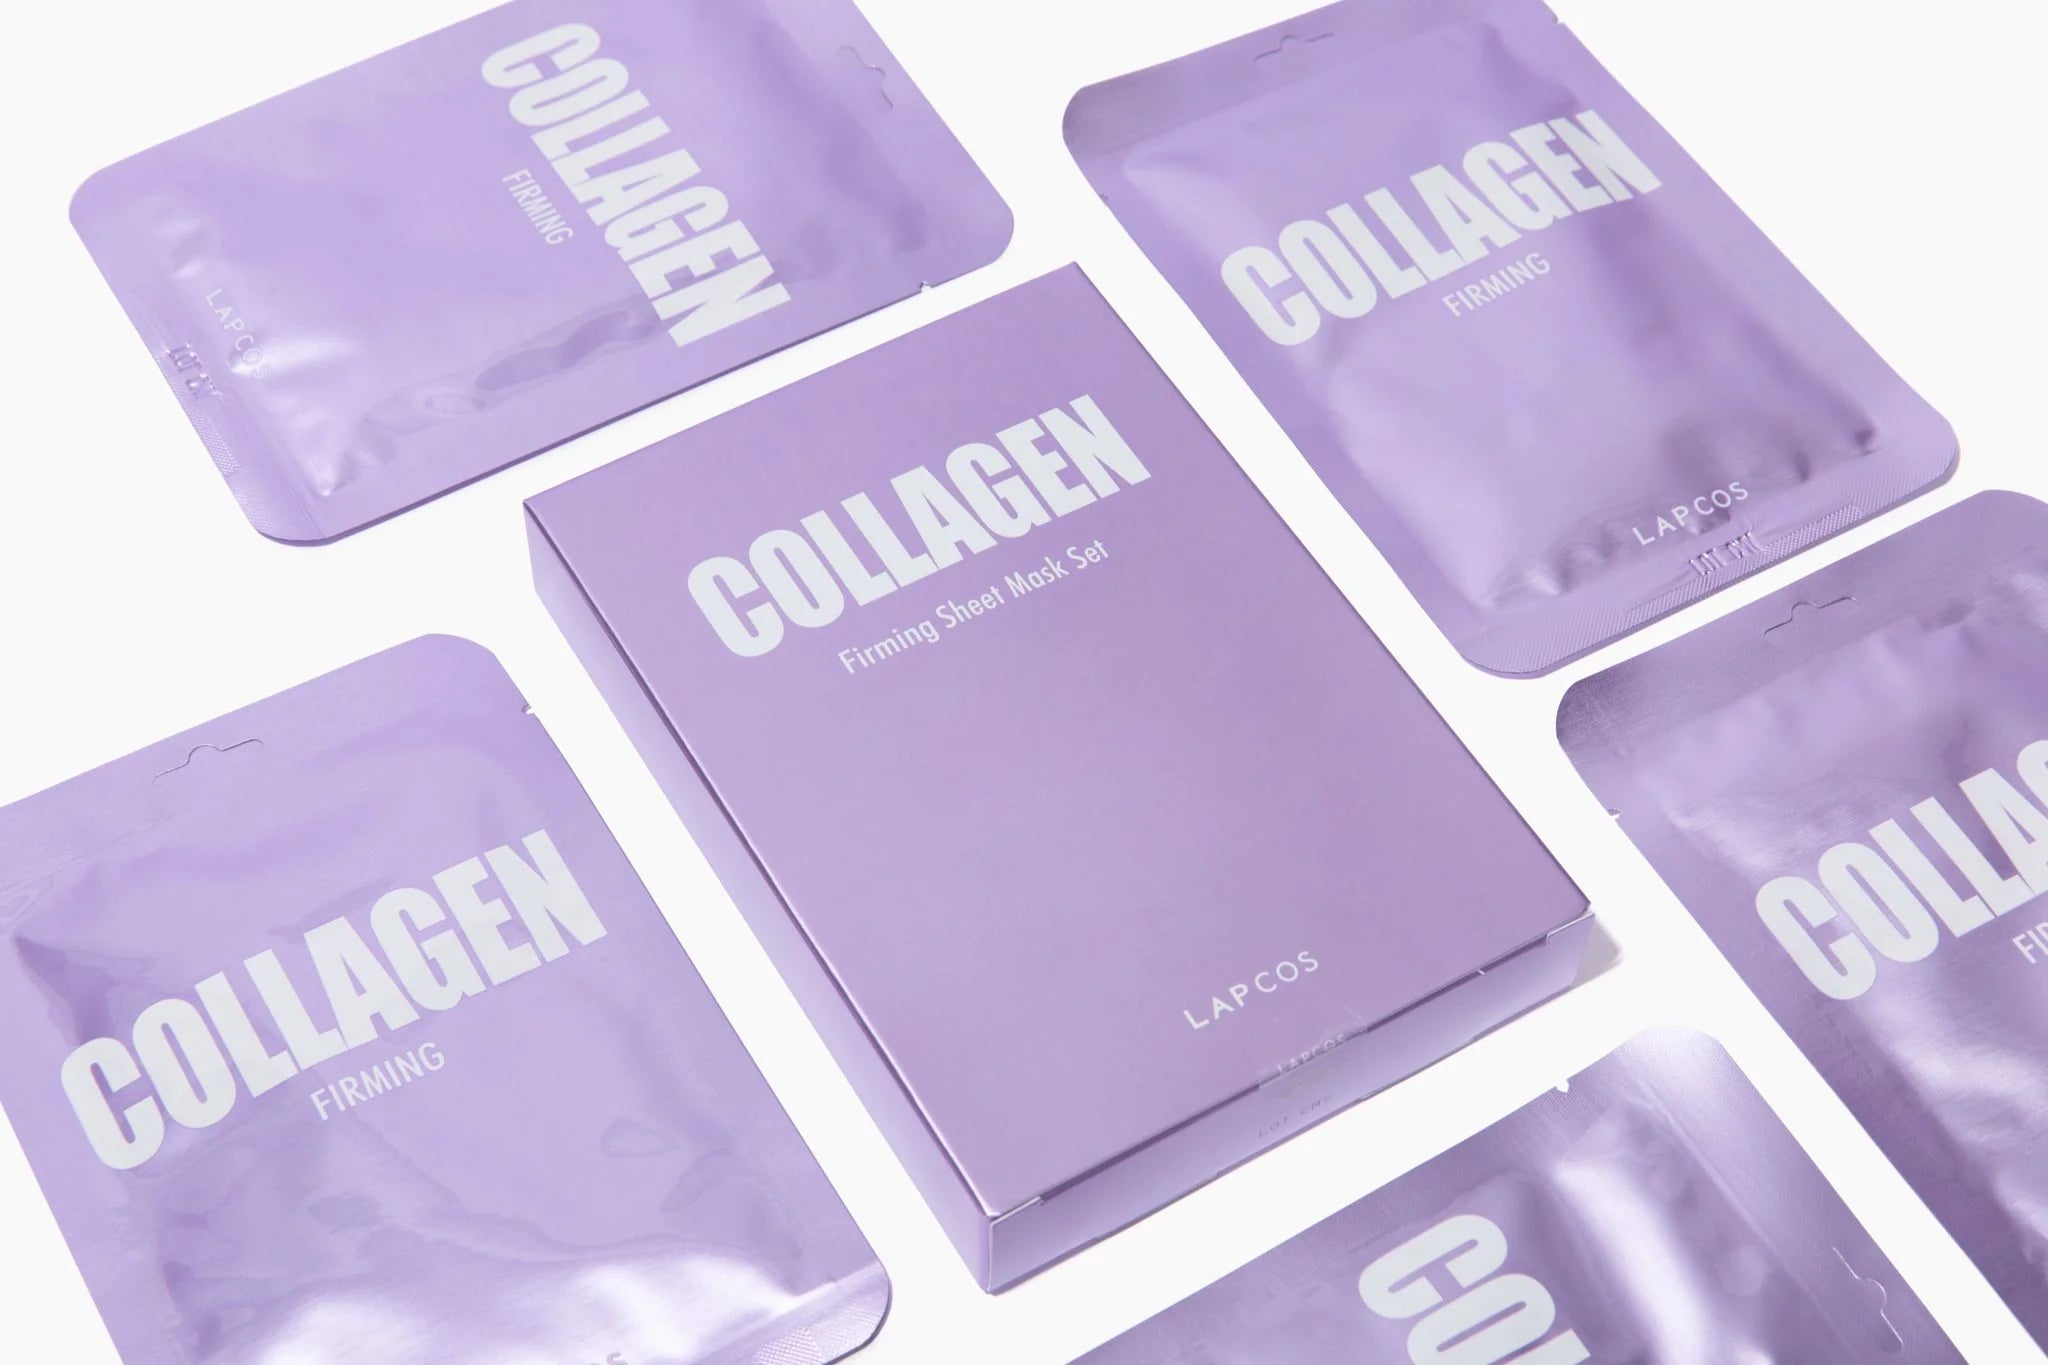 Lapcos Daily Collagen Mask